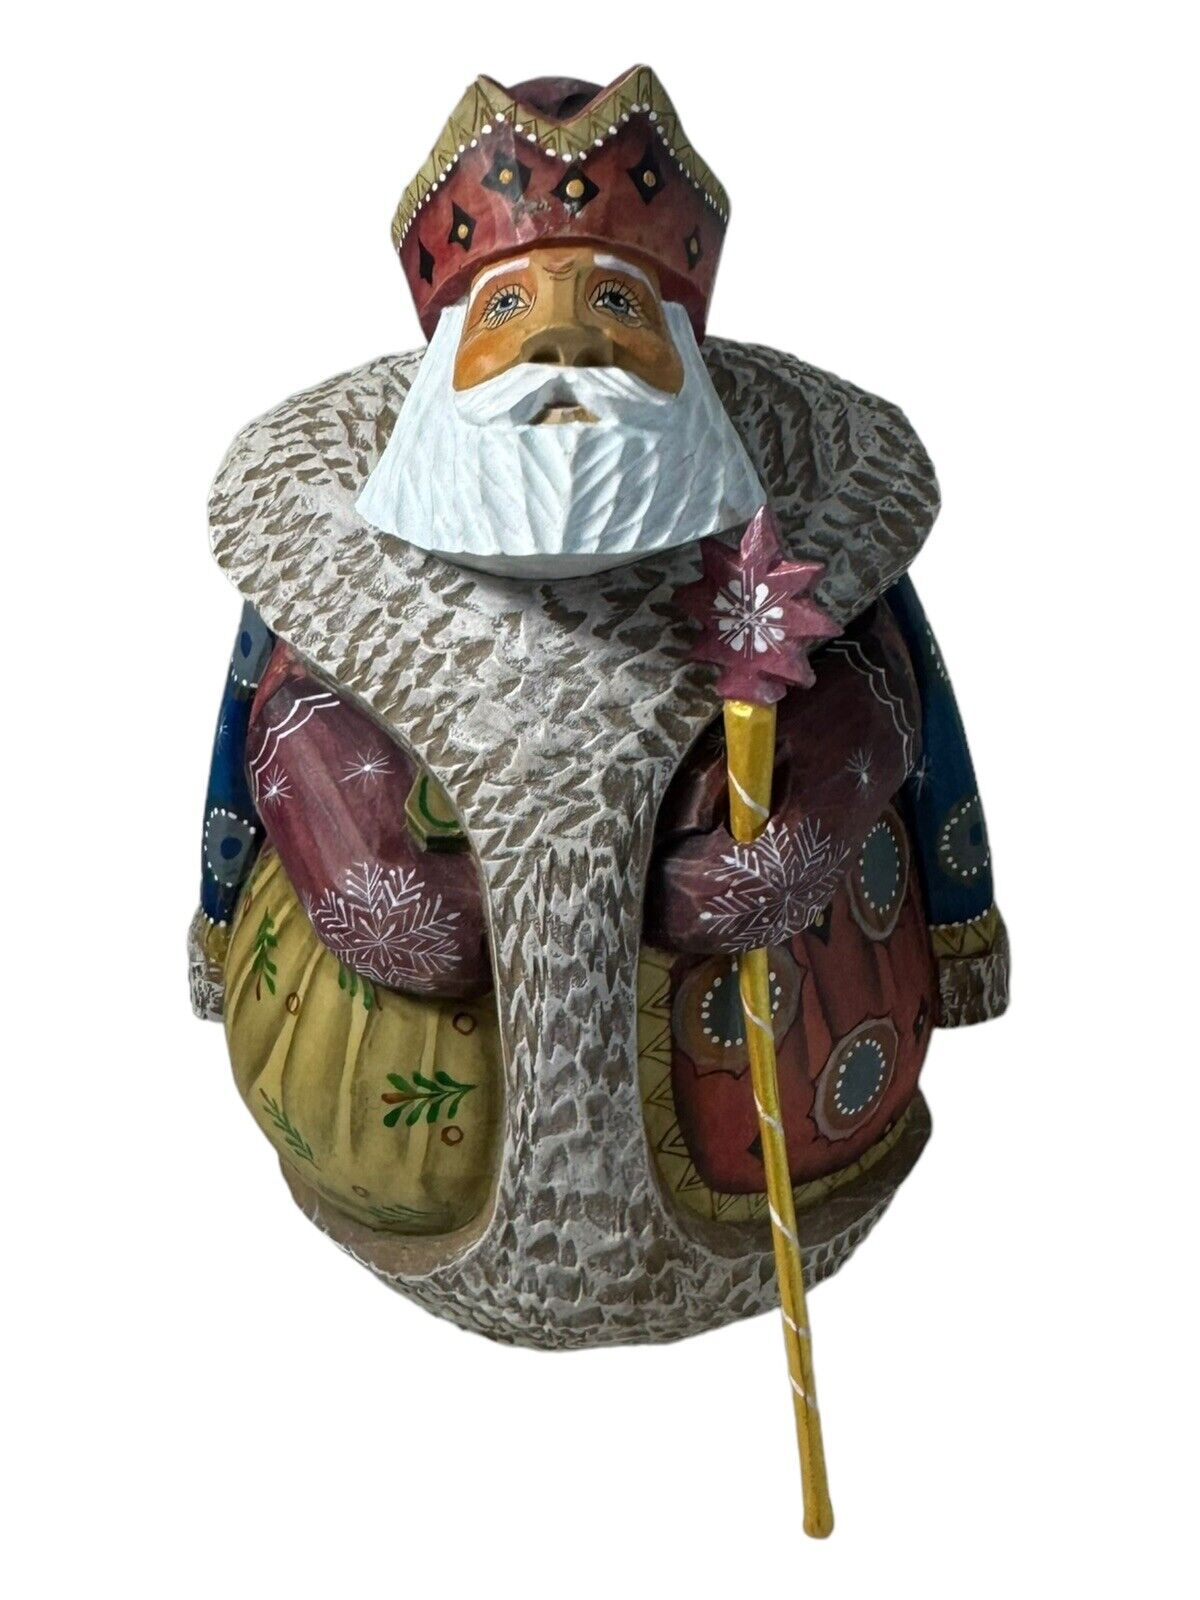  G. Debrekht Carved Wood and Hand-Painted Kindred Spirits Christmas Santa, 7\